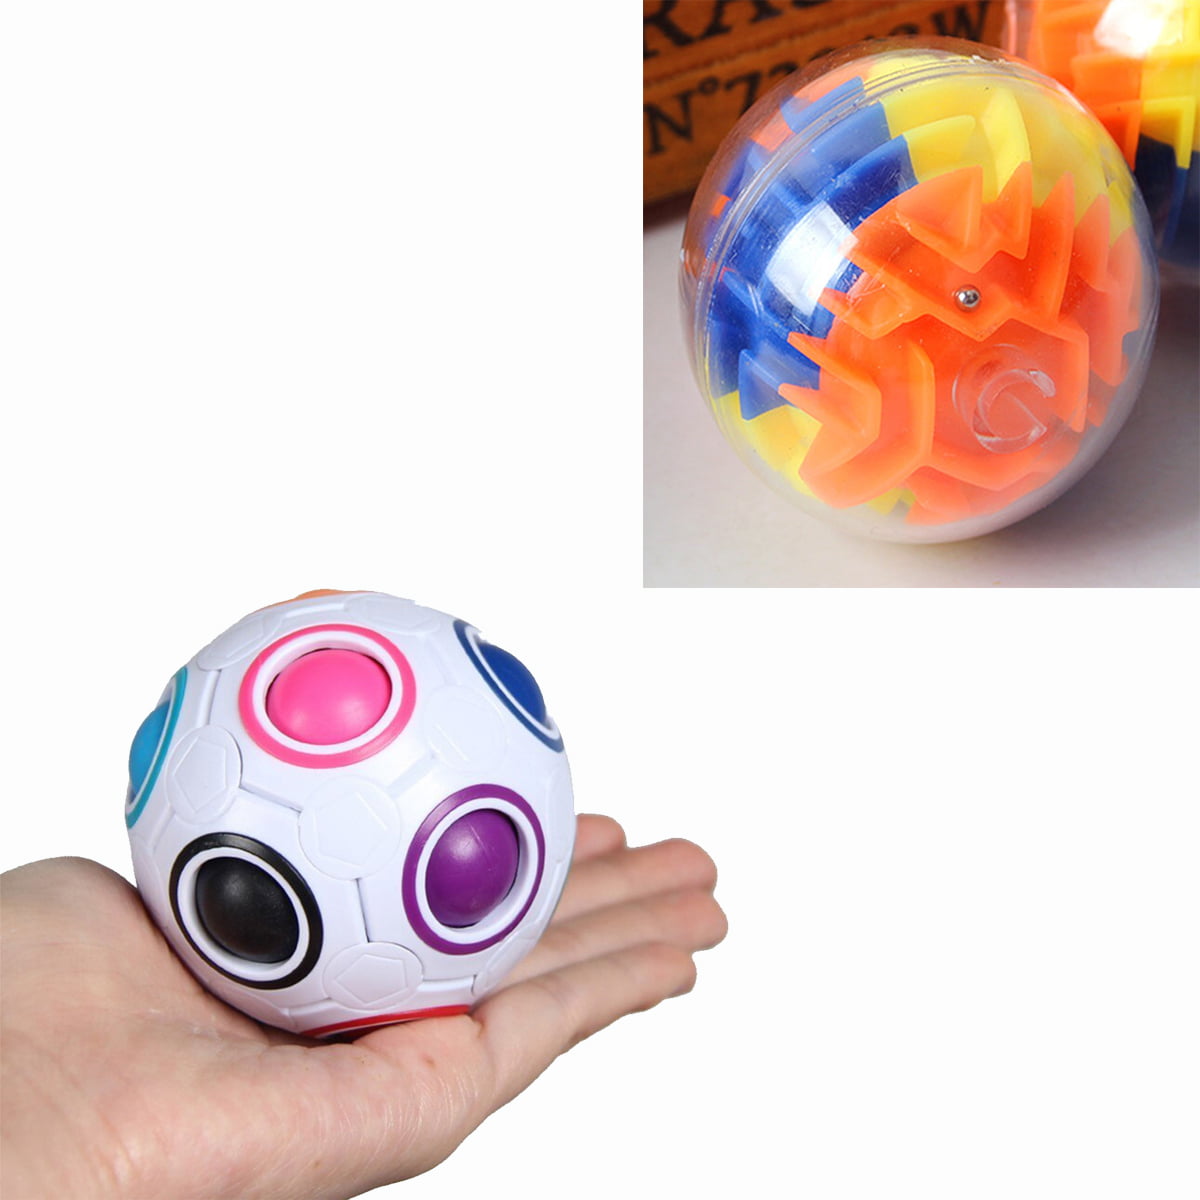 Details about   US Magic rainbow fidget ball Speed Cube sensory 3D toy puzzle for Kids xmas gift 